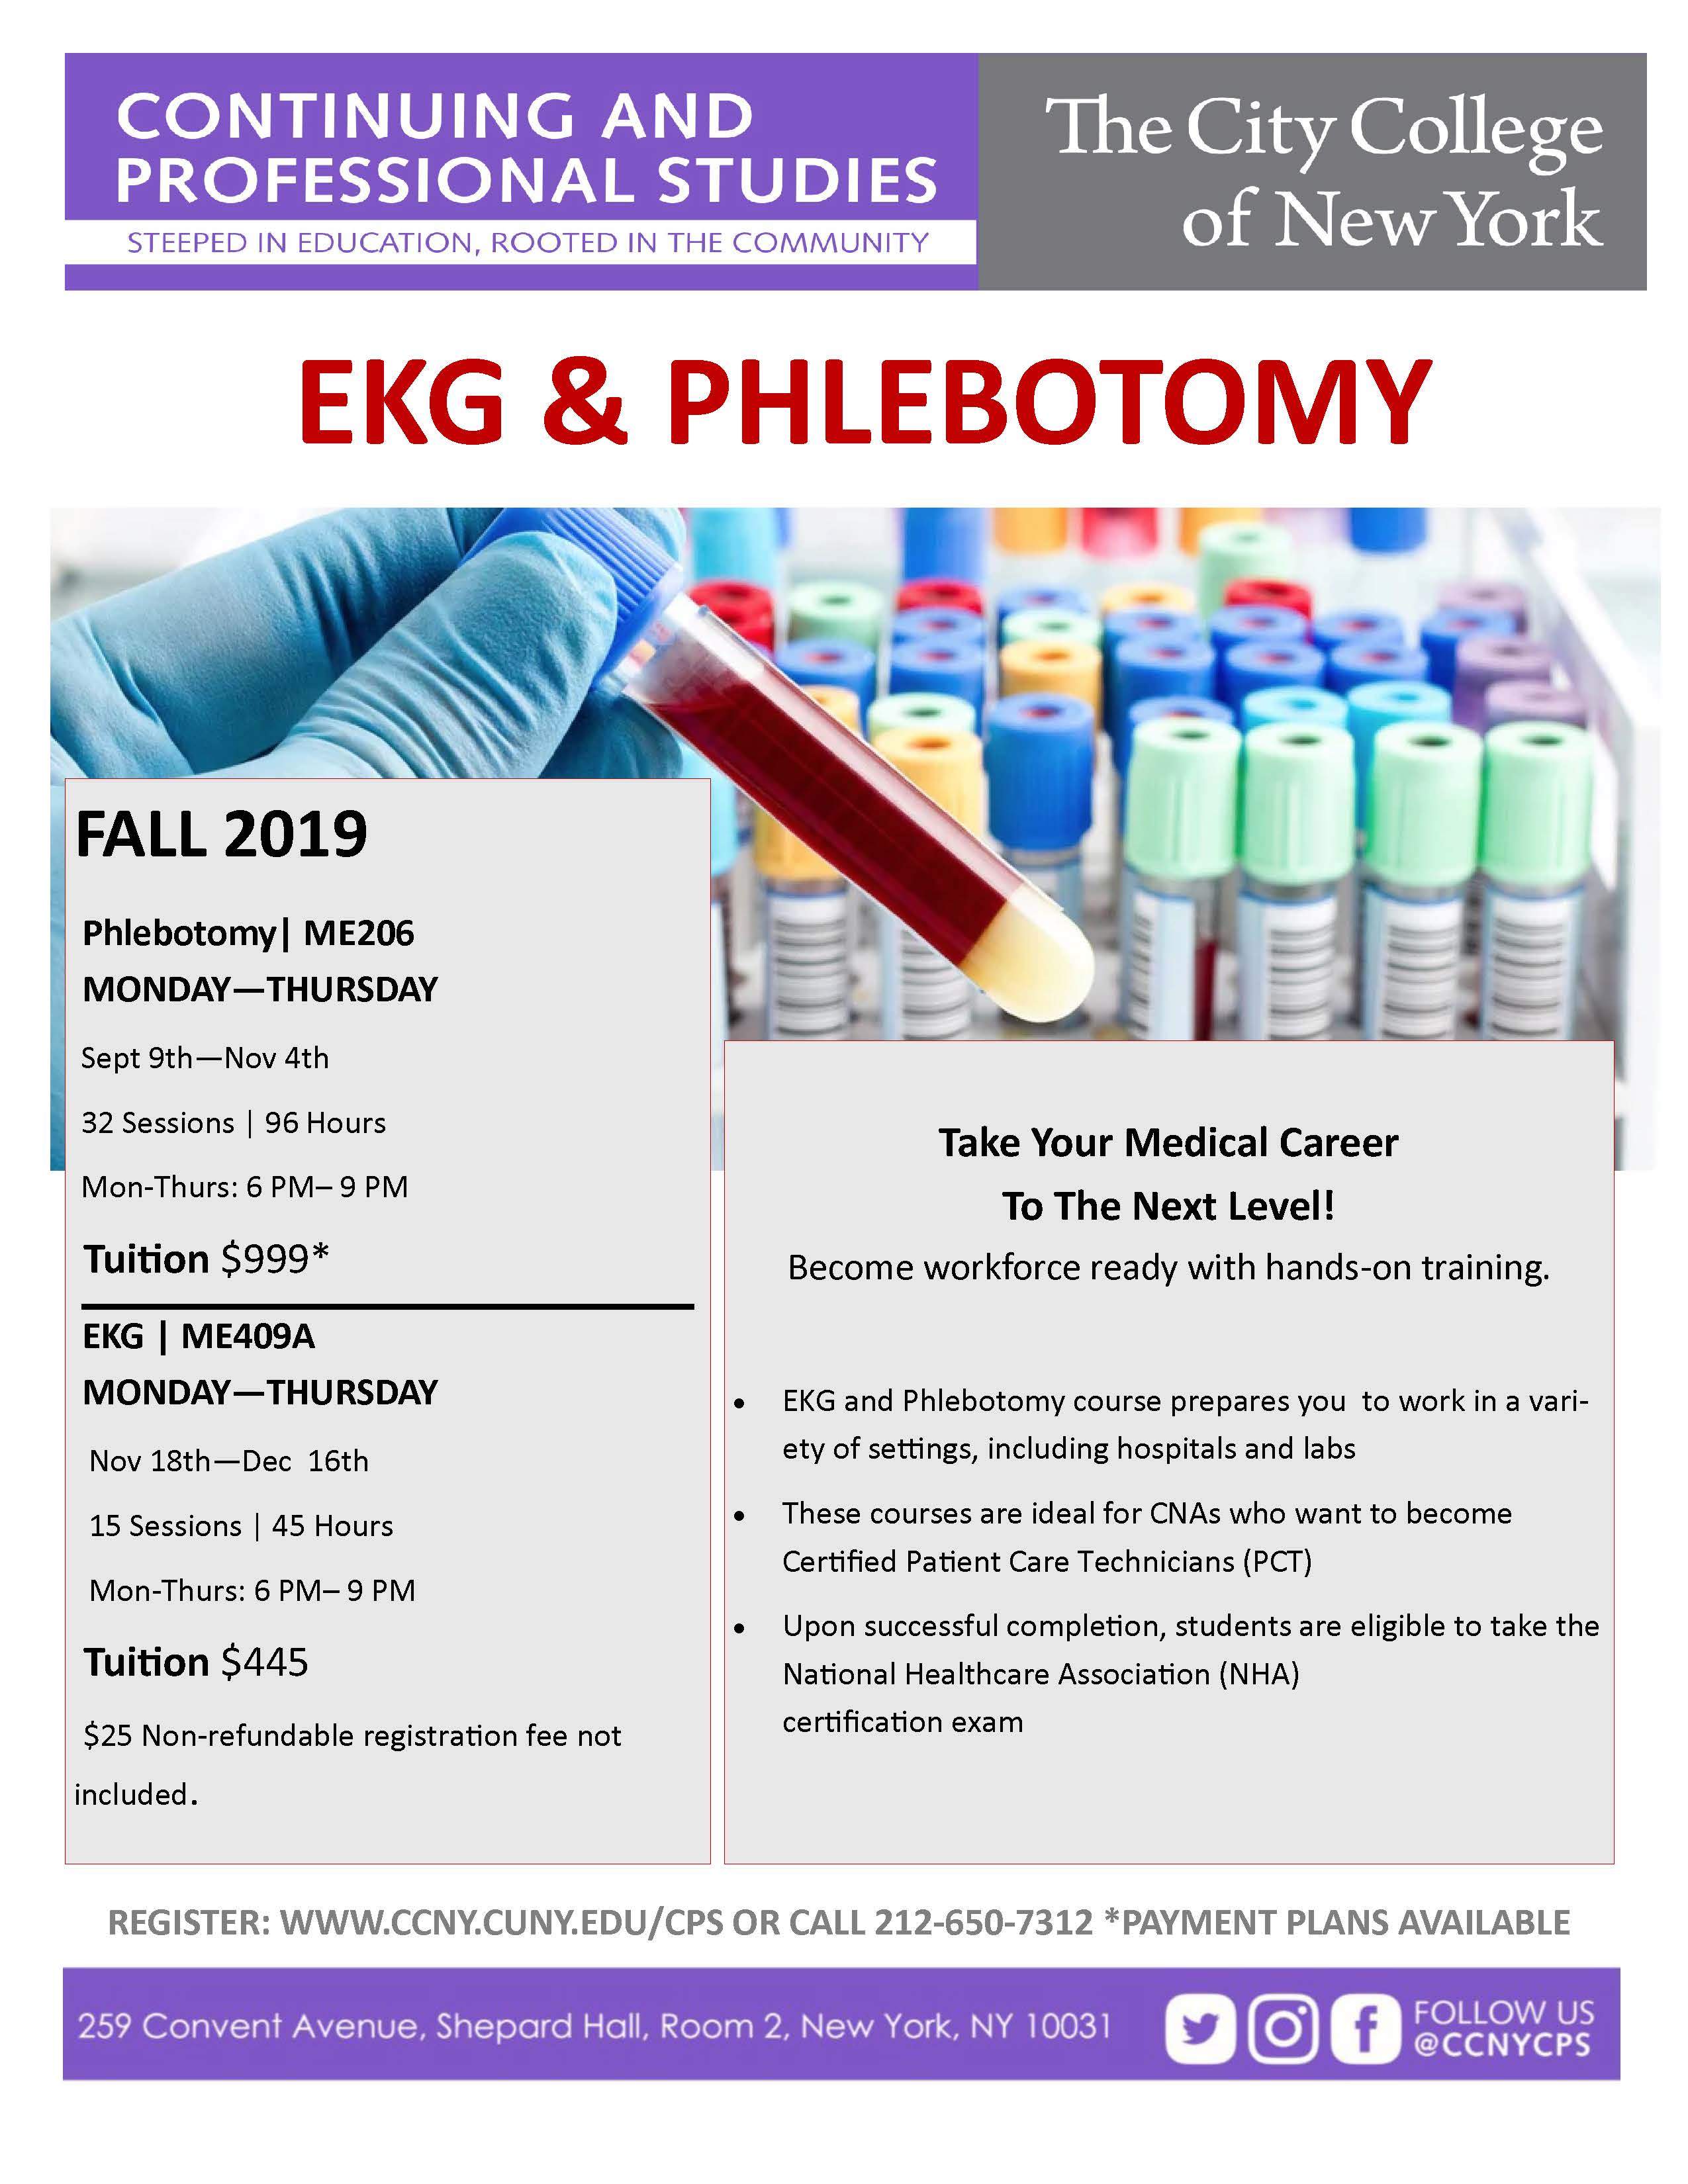 EKG & Phlebotomy Certification | The City College of New York